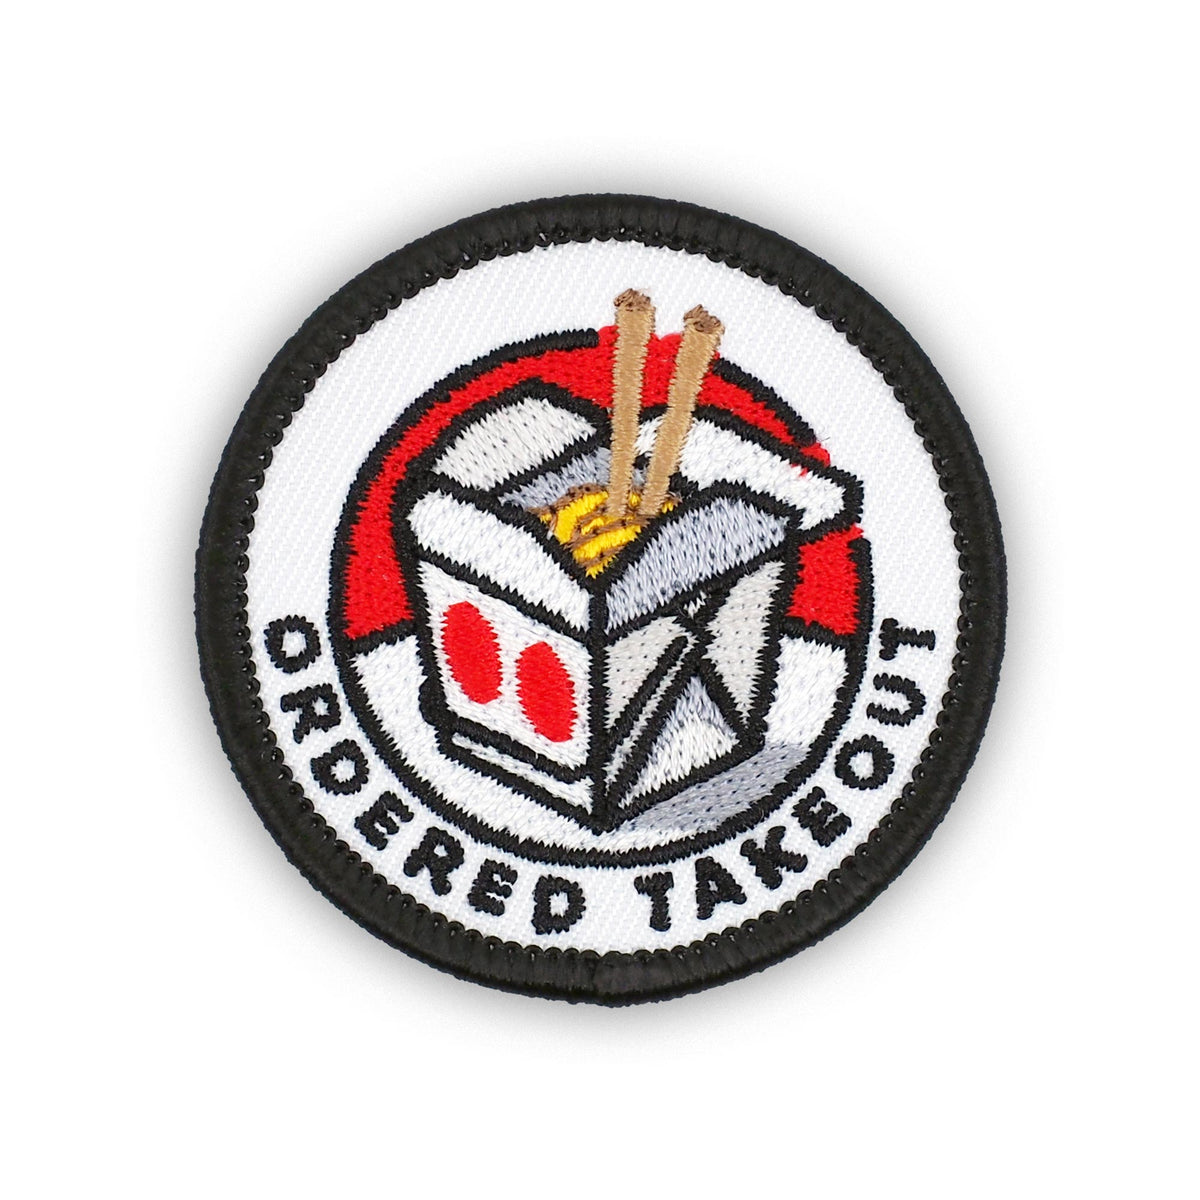 Ordered Takeout individual adulting merit badge patch for adults